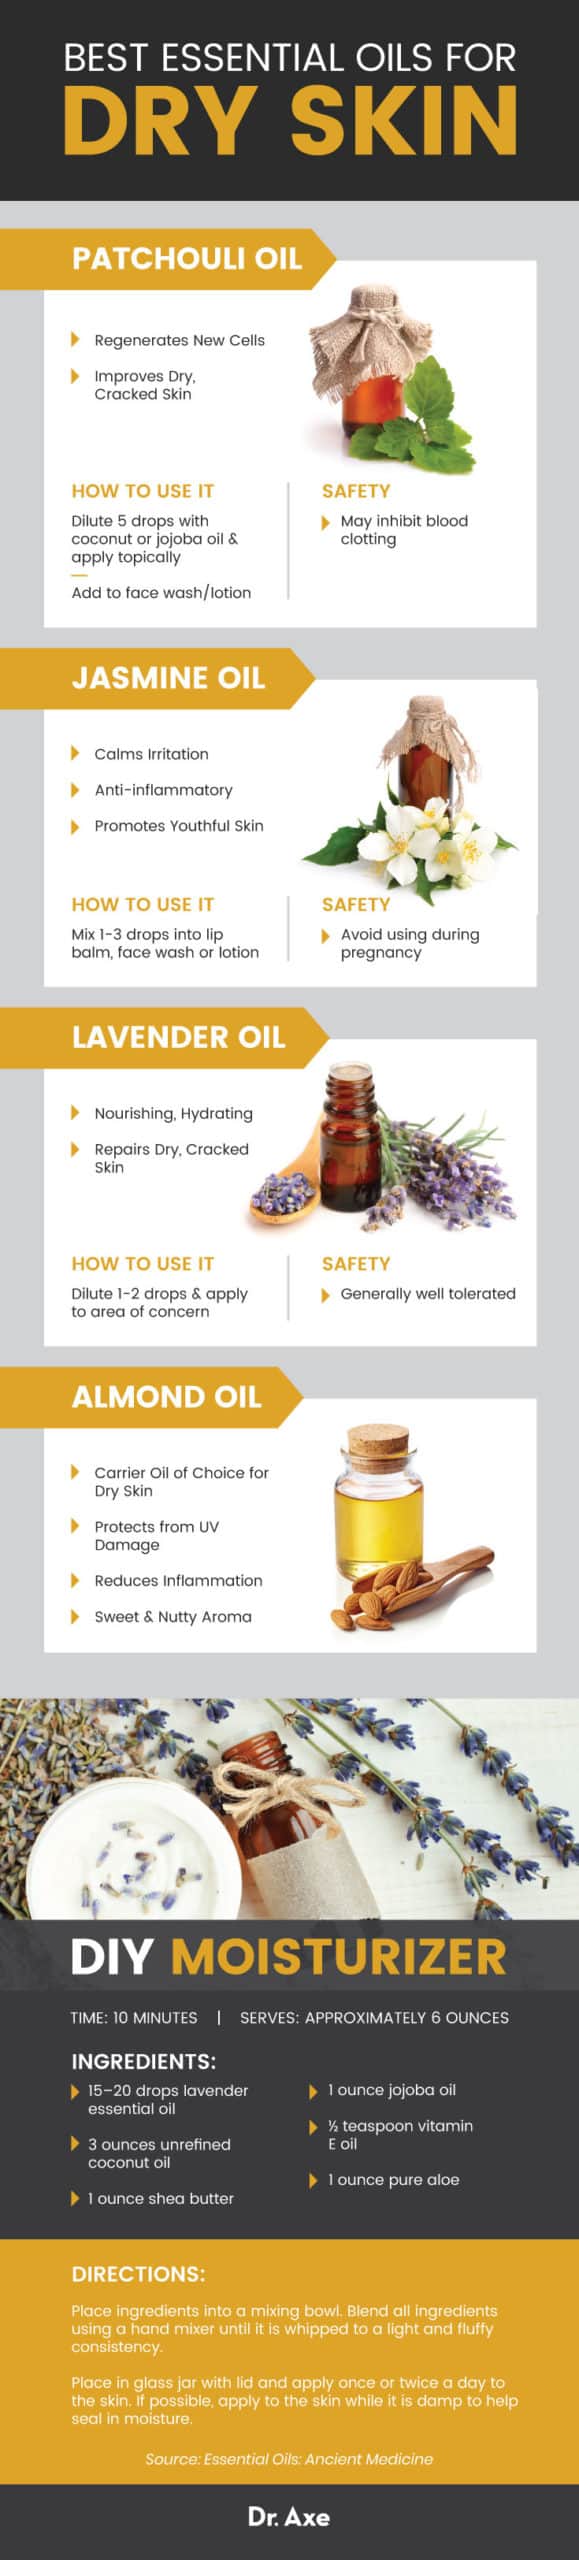 Essential oils for colds and dry skin - Dr. Axe